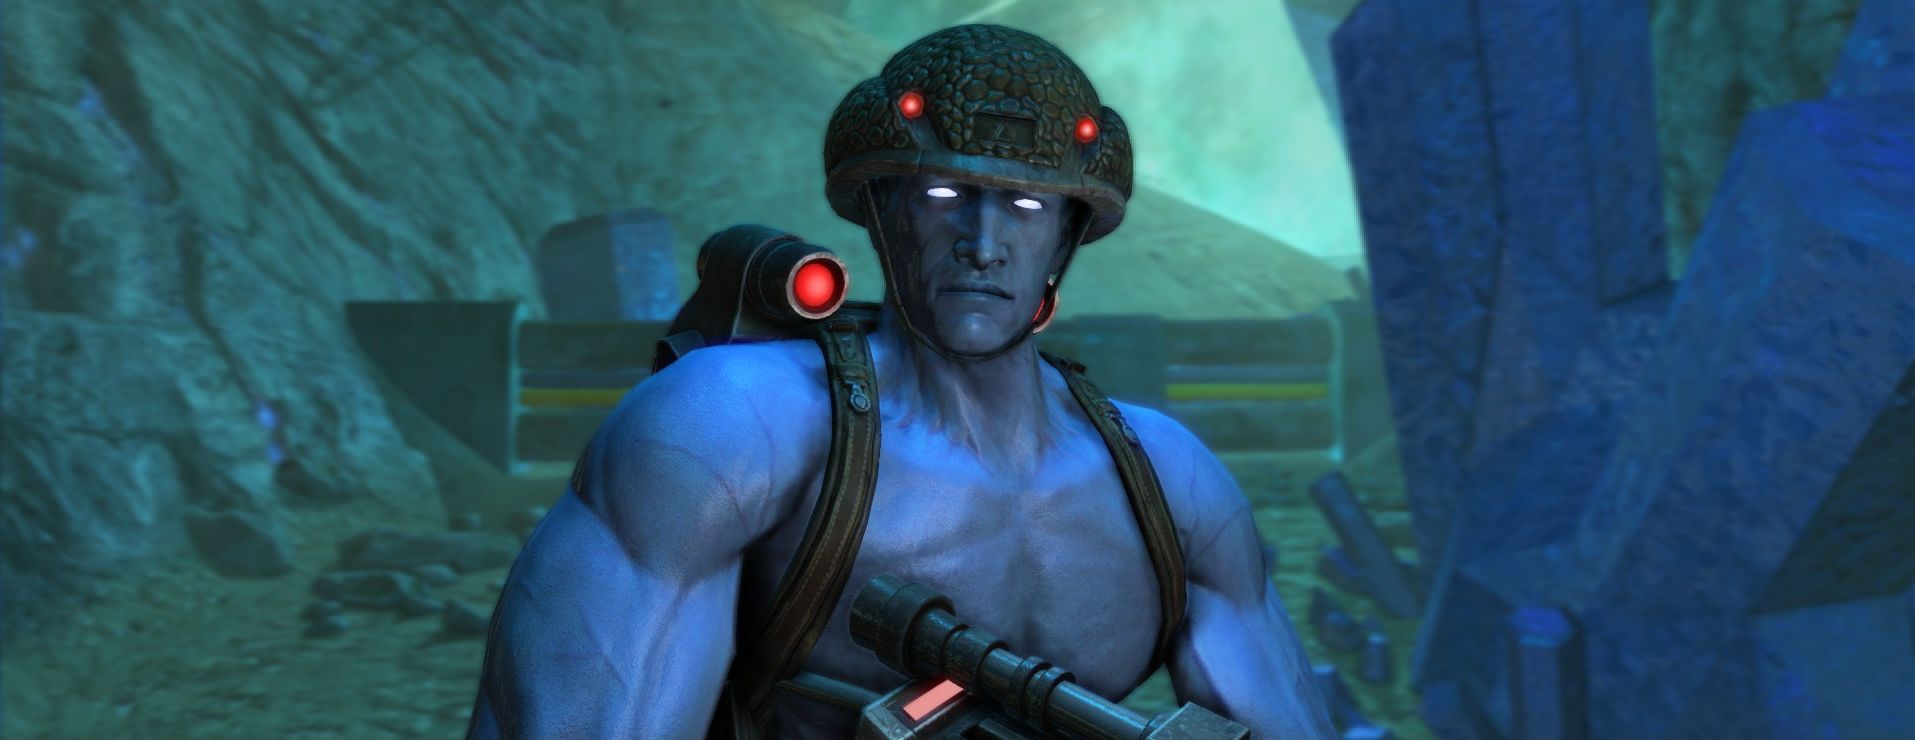 is rogue trooper multiplayer still active employee